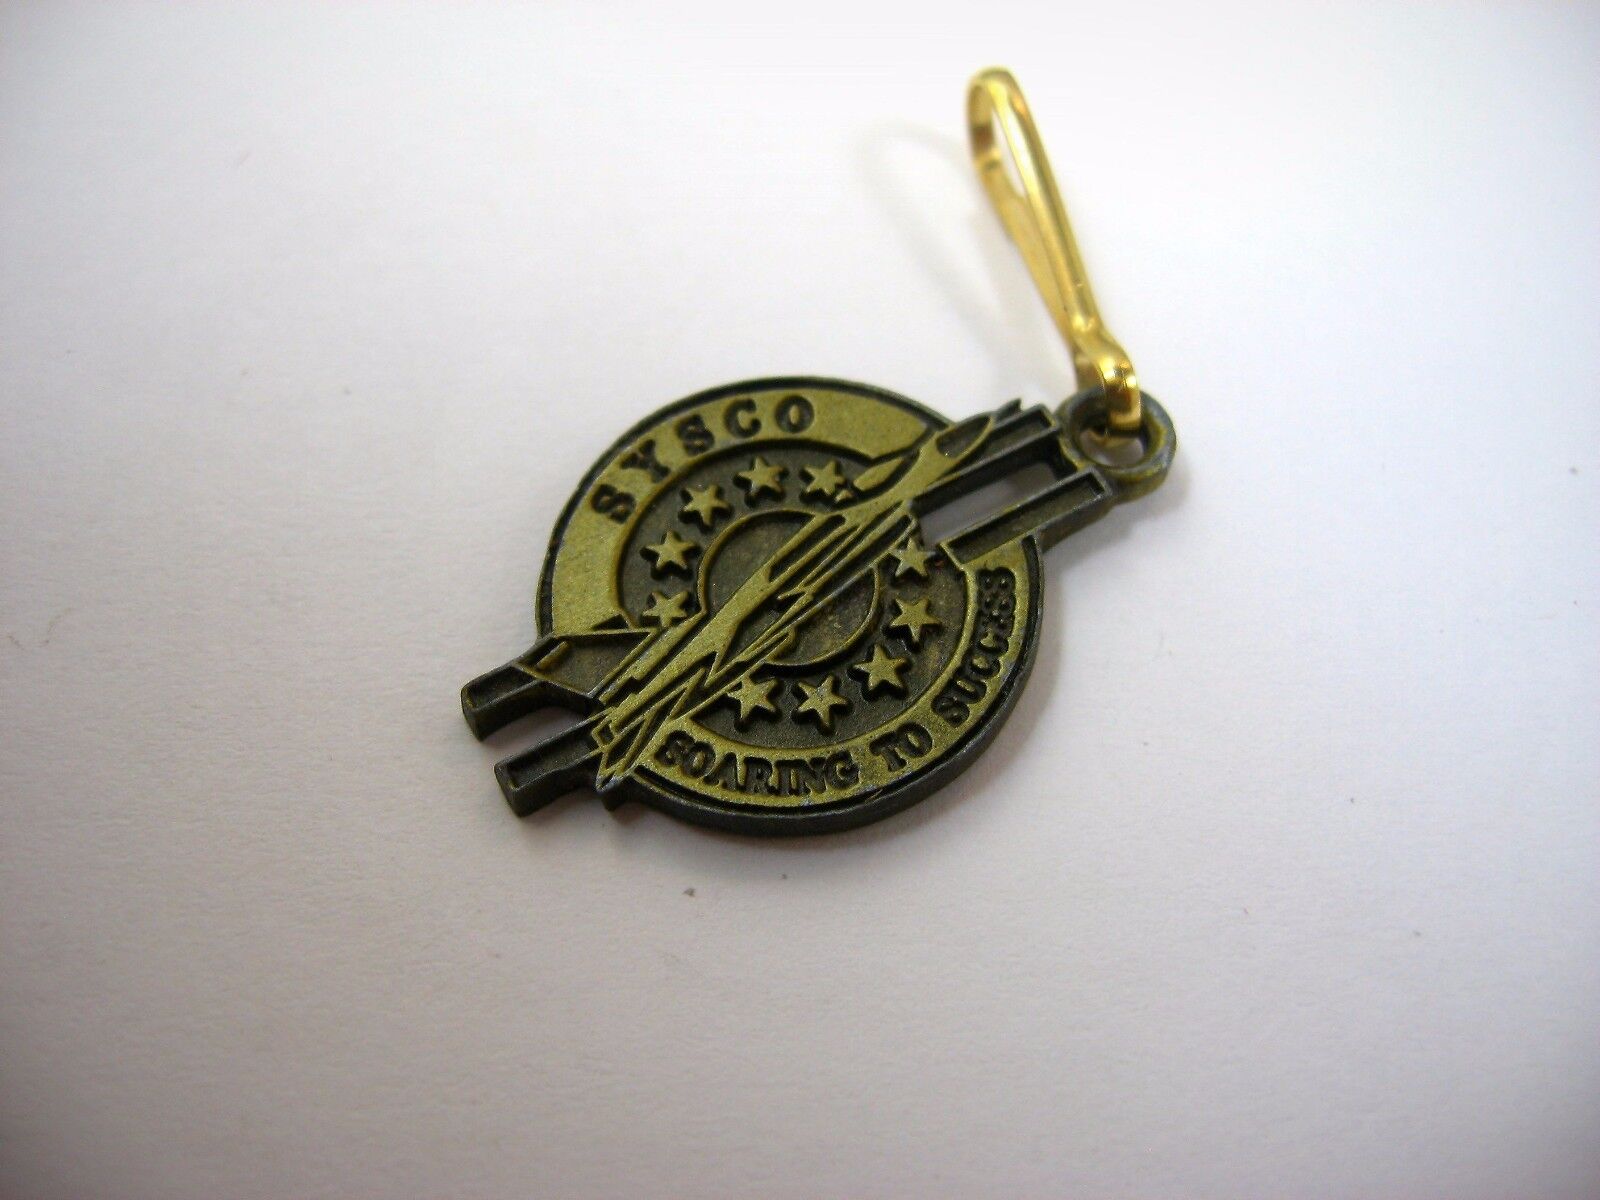 Vintage Pendant Keychain Charm: Sysco Soaring to Success